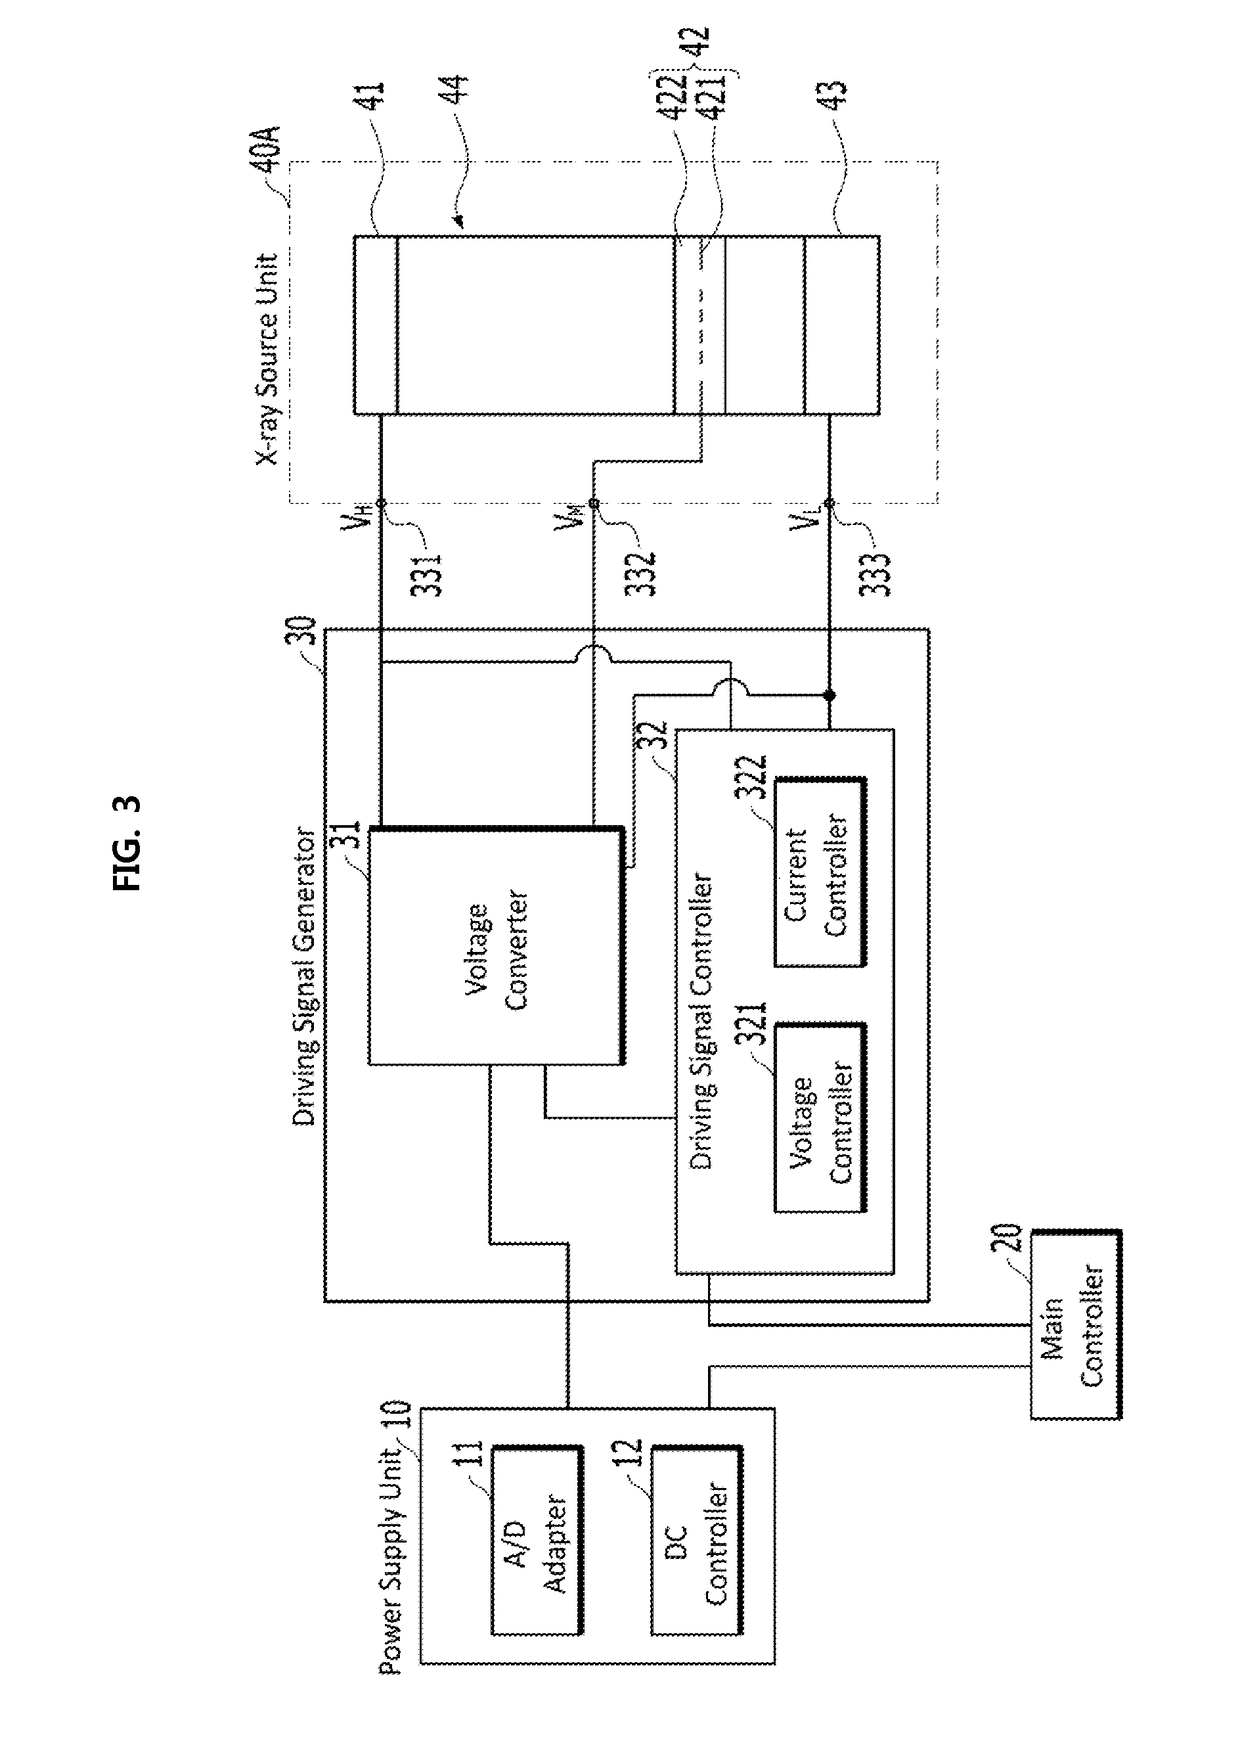 Portable x-ray generation device having electric field emission x-ray source